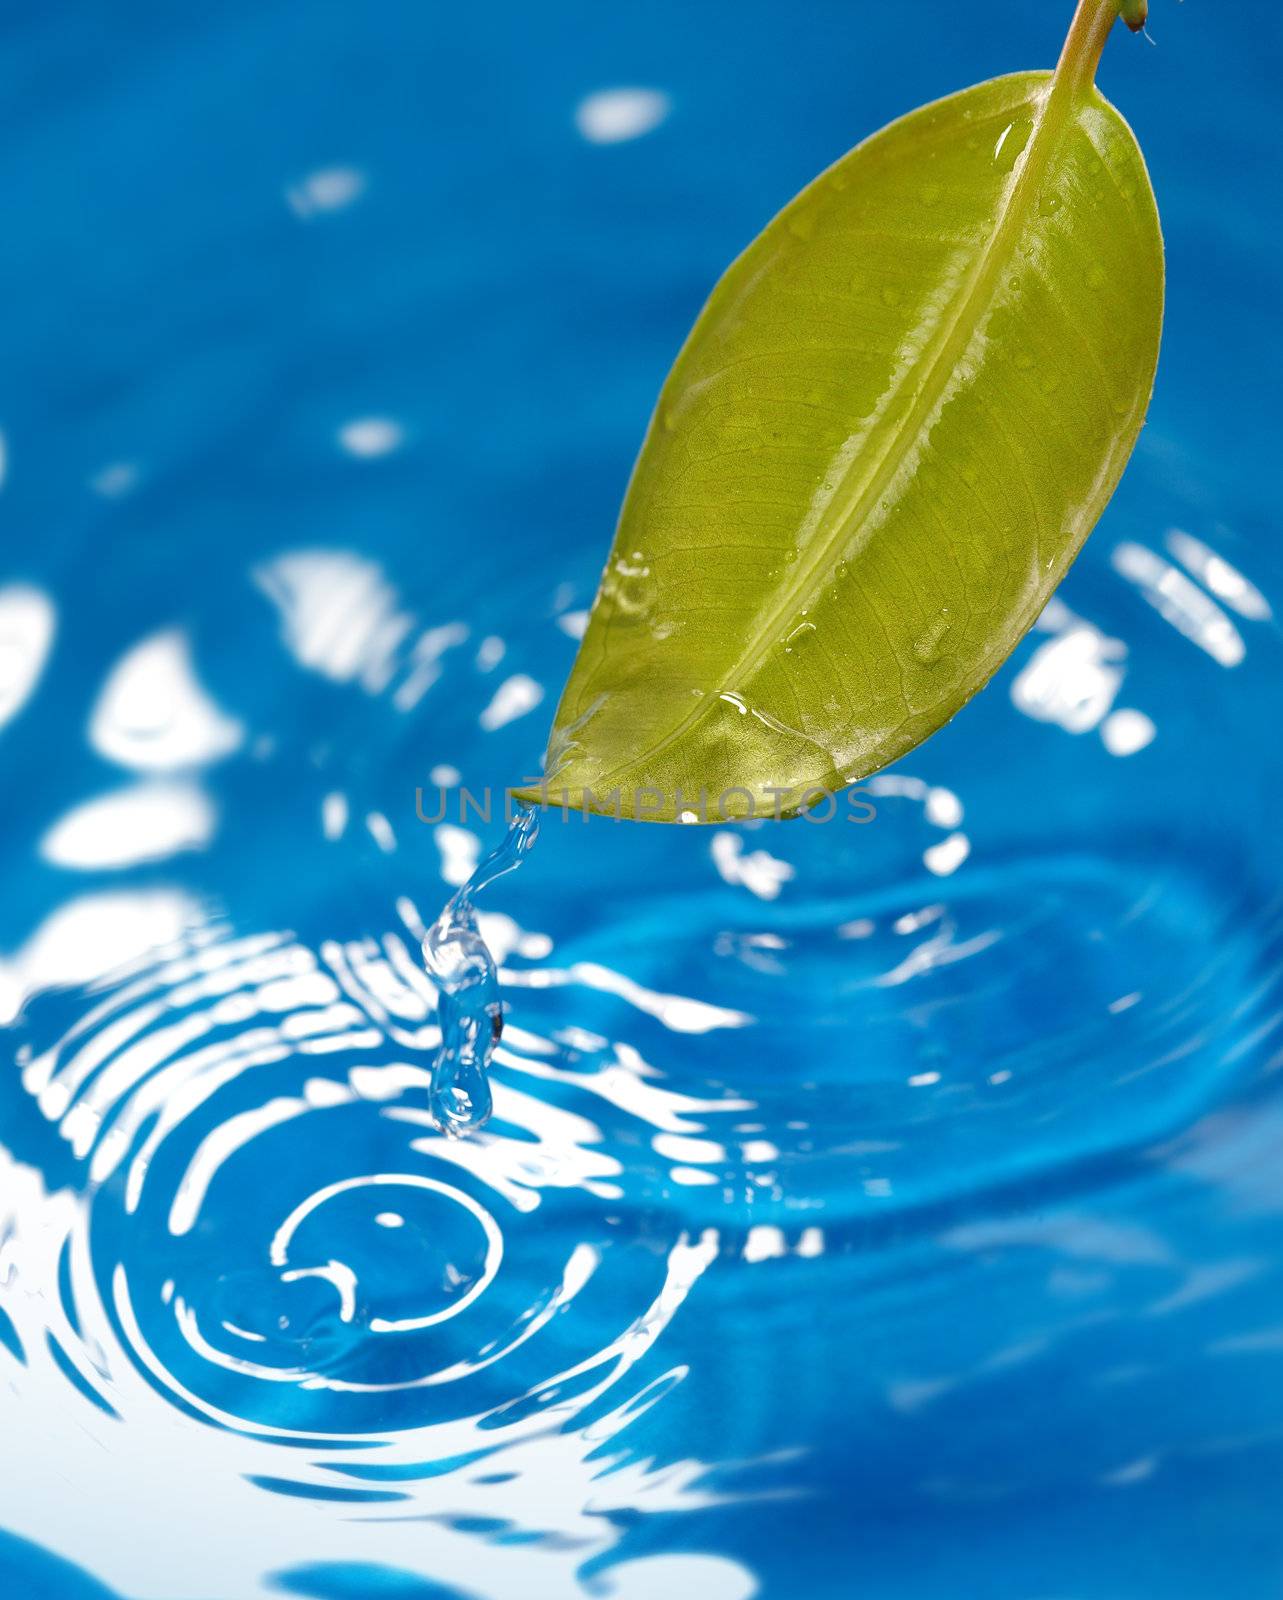 Close-up photo of the wet leaf on a blue liquid background with flowing water. Natural colors. Shallow depth of field added by macro lens for natural view